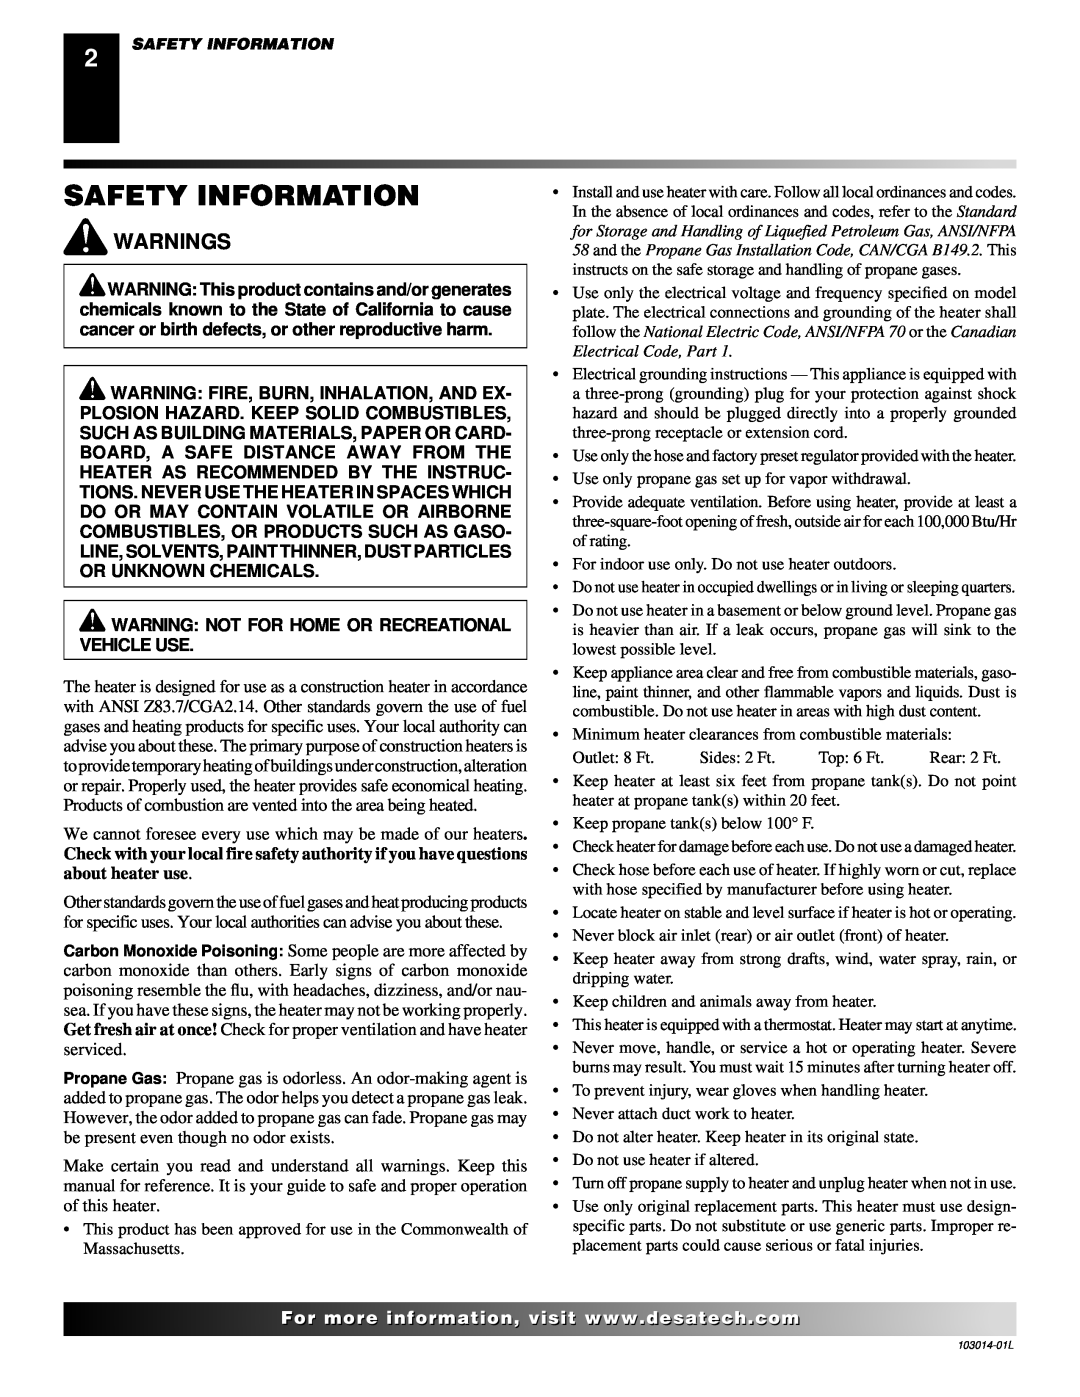 Desa SBLP155AT owner manual Safety Information, Warnings, Warning Not For Home Or Recreational Vehicle Use 